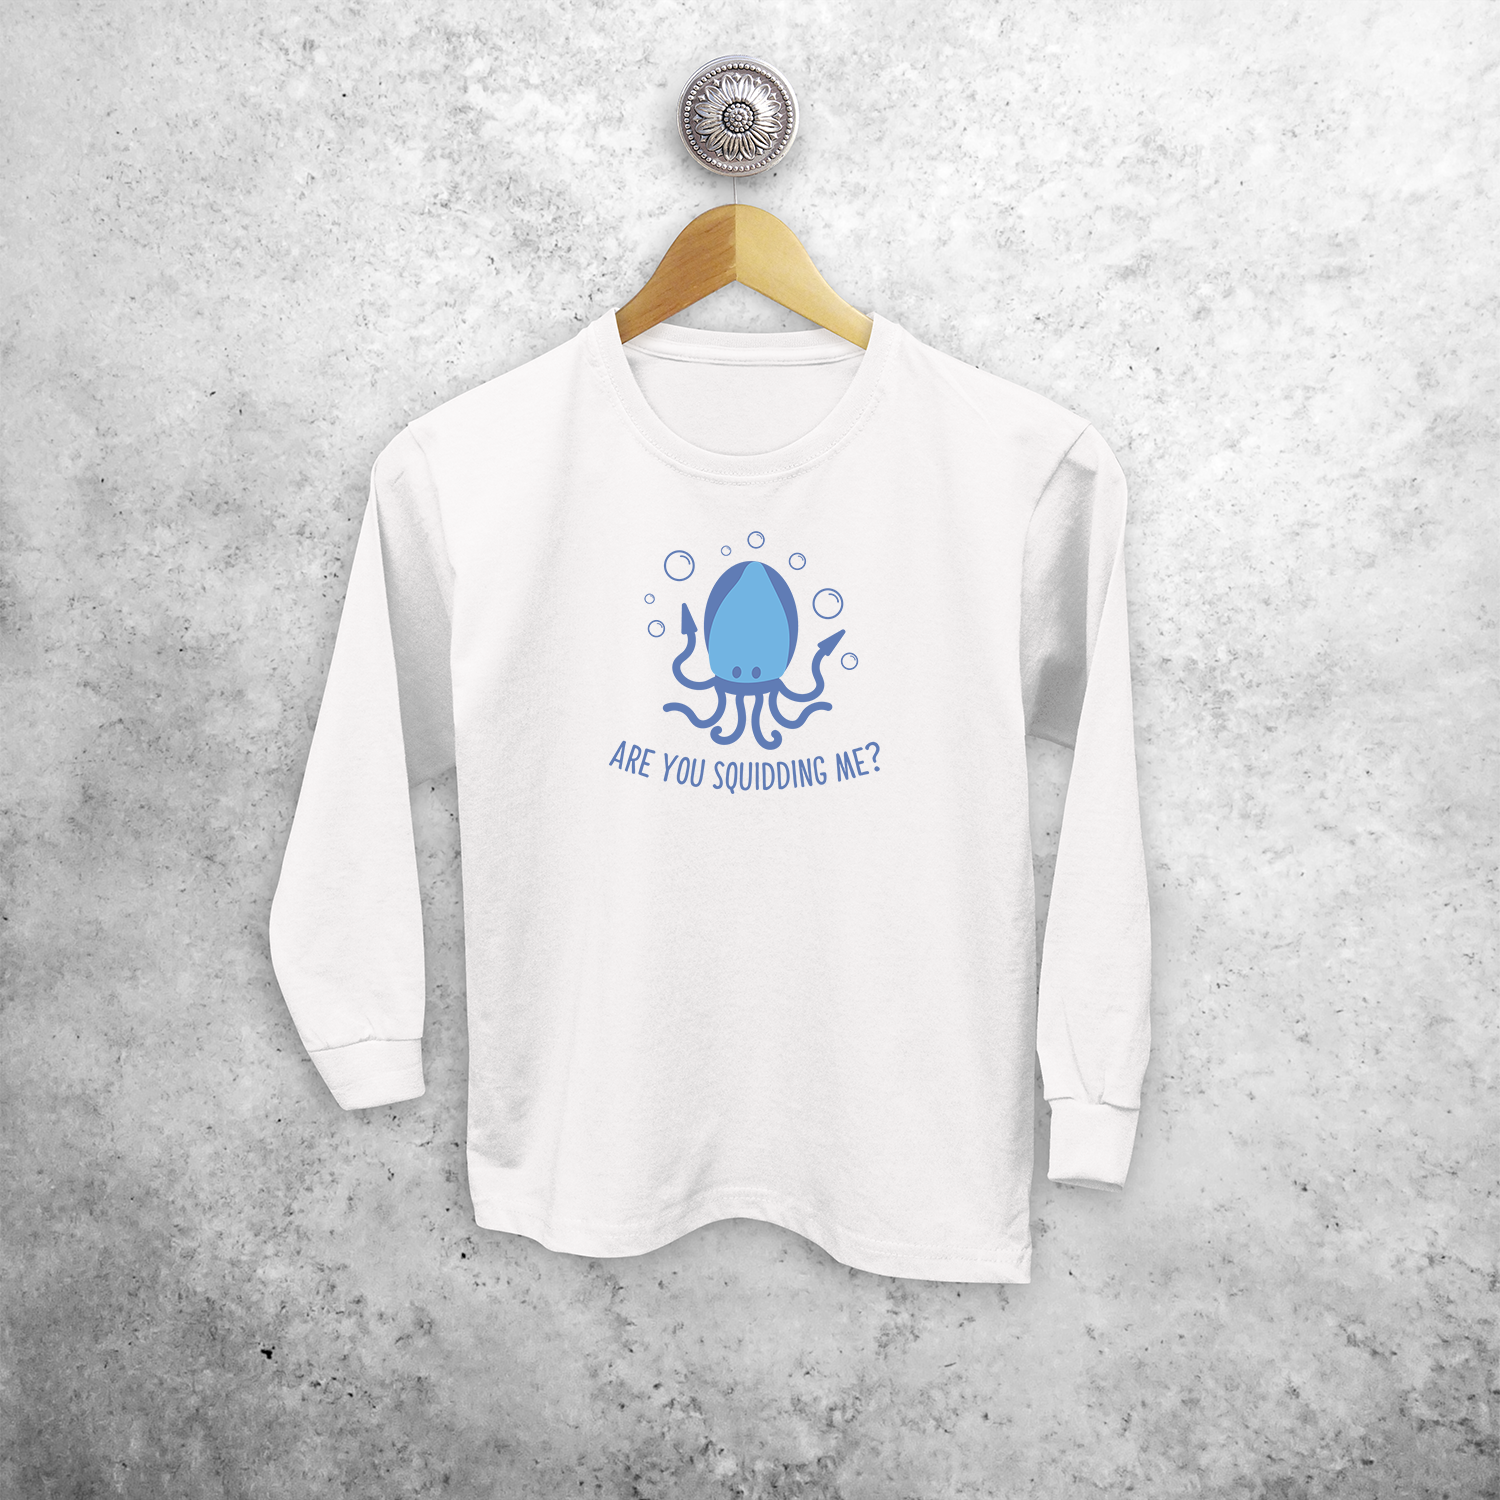 'Are you squidding me?' kids longsleeve shirt